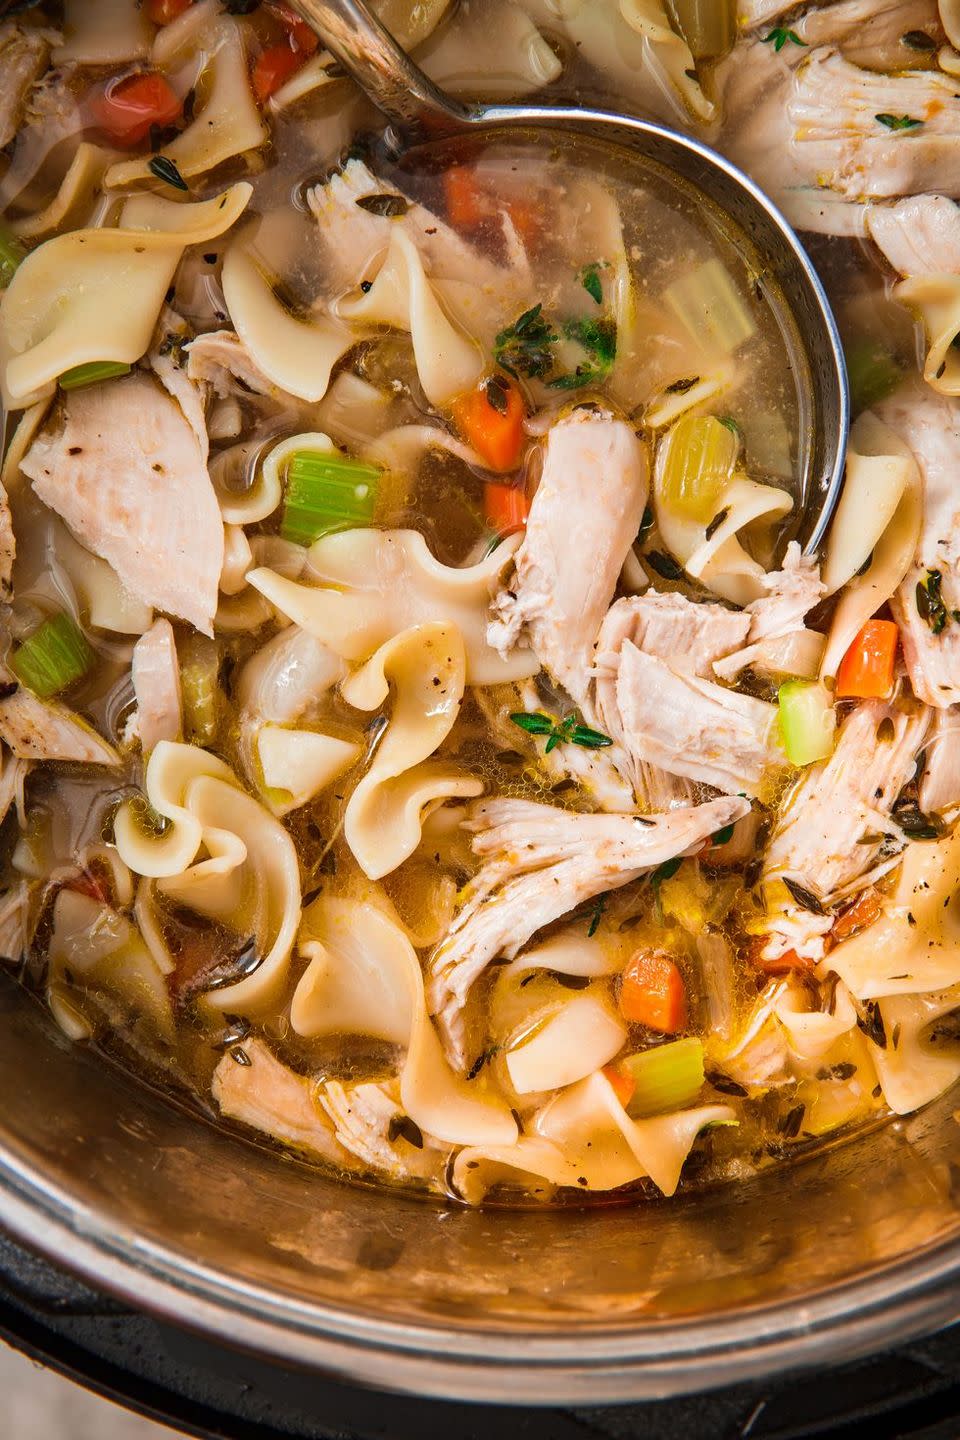 <p>Is there anything more comforting than a bowl of <a href="https://www.delish.com/uk/cooking/recipes/a31728080/homemade-chicken-noodle-soup-recipe/" rel="nofollow noopener" target="_blank" data-ylk="slk:Chicken Noodle Soup" class="link rapid-noclick-resp">Chicken Noodle Soup</a>? This Instant Pot recipe makes light work of this homestyle classic. Using the sauté feature, you can easily develop flavours by cooking the mirepoix (that's onions, carrots, and celery) before adding the remaining ingredients.</p><p>Get the <a href="https://www.delish.com/uk/cooking/recipes/a30252267/instant-pot-chicken-soup/" rel="nofollow noopener" target="_blank" data-ylk="slk:Instant Pot Chicken Noodle Soup" class="link rapid-noclick-resp">Instant Pot Chicken Noodle Soup</a> recipe.</p>